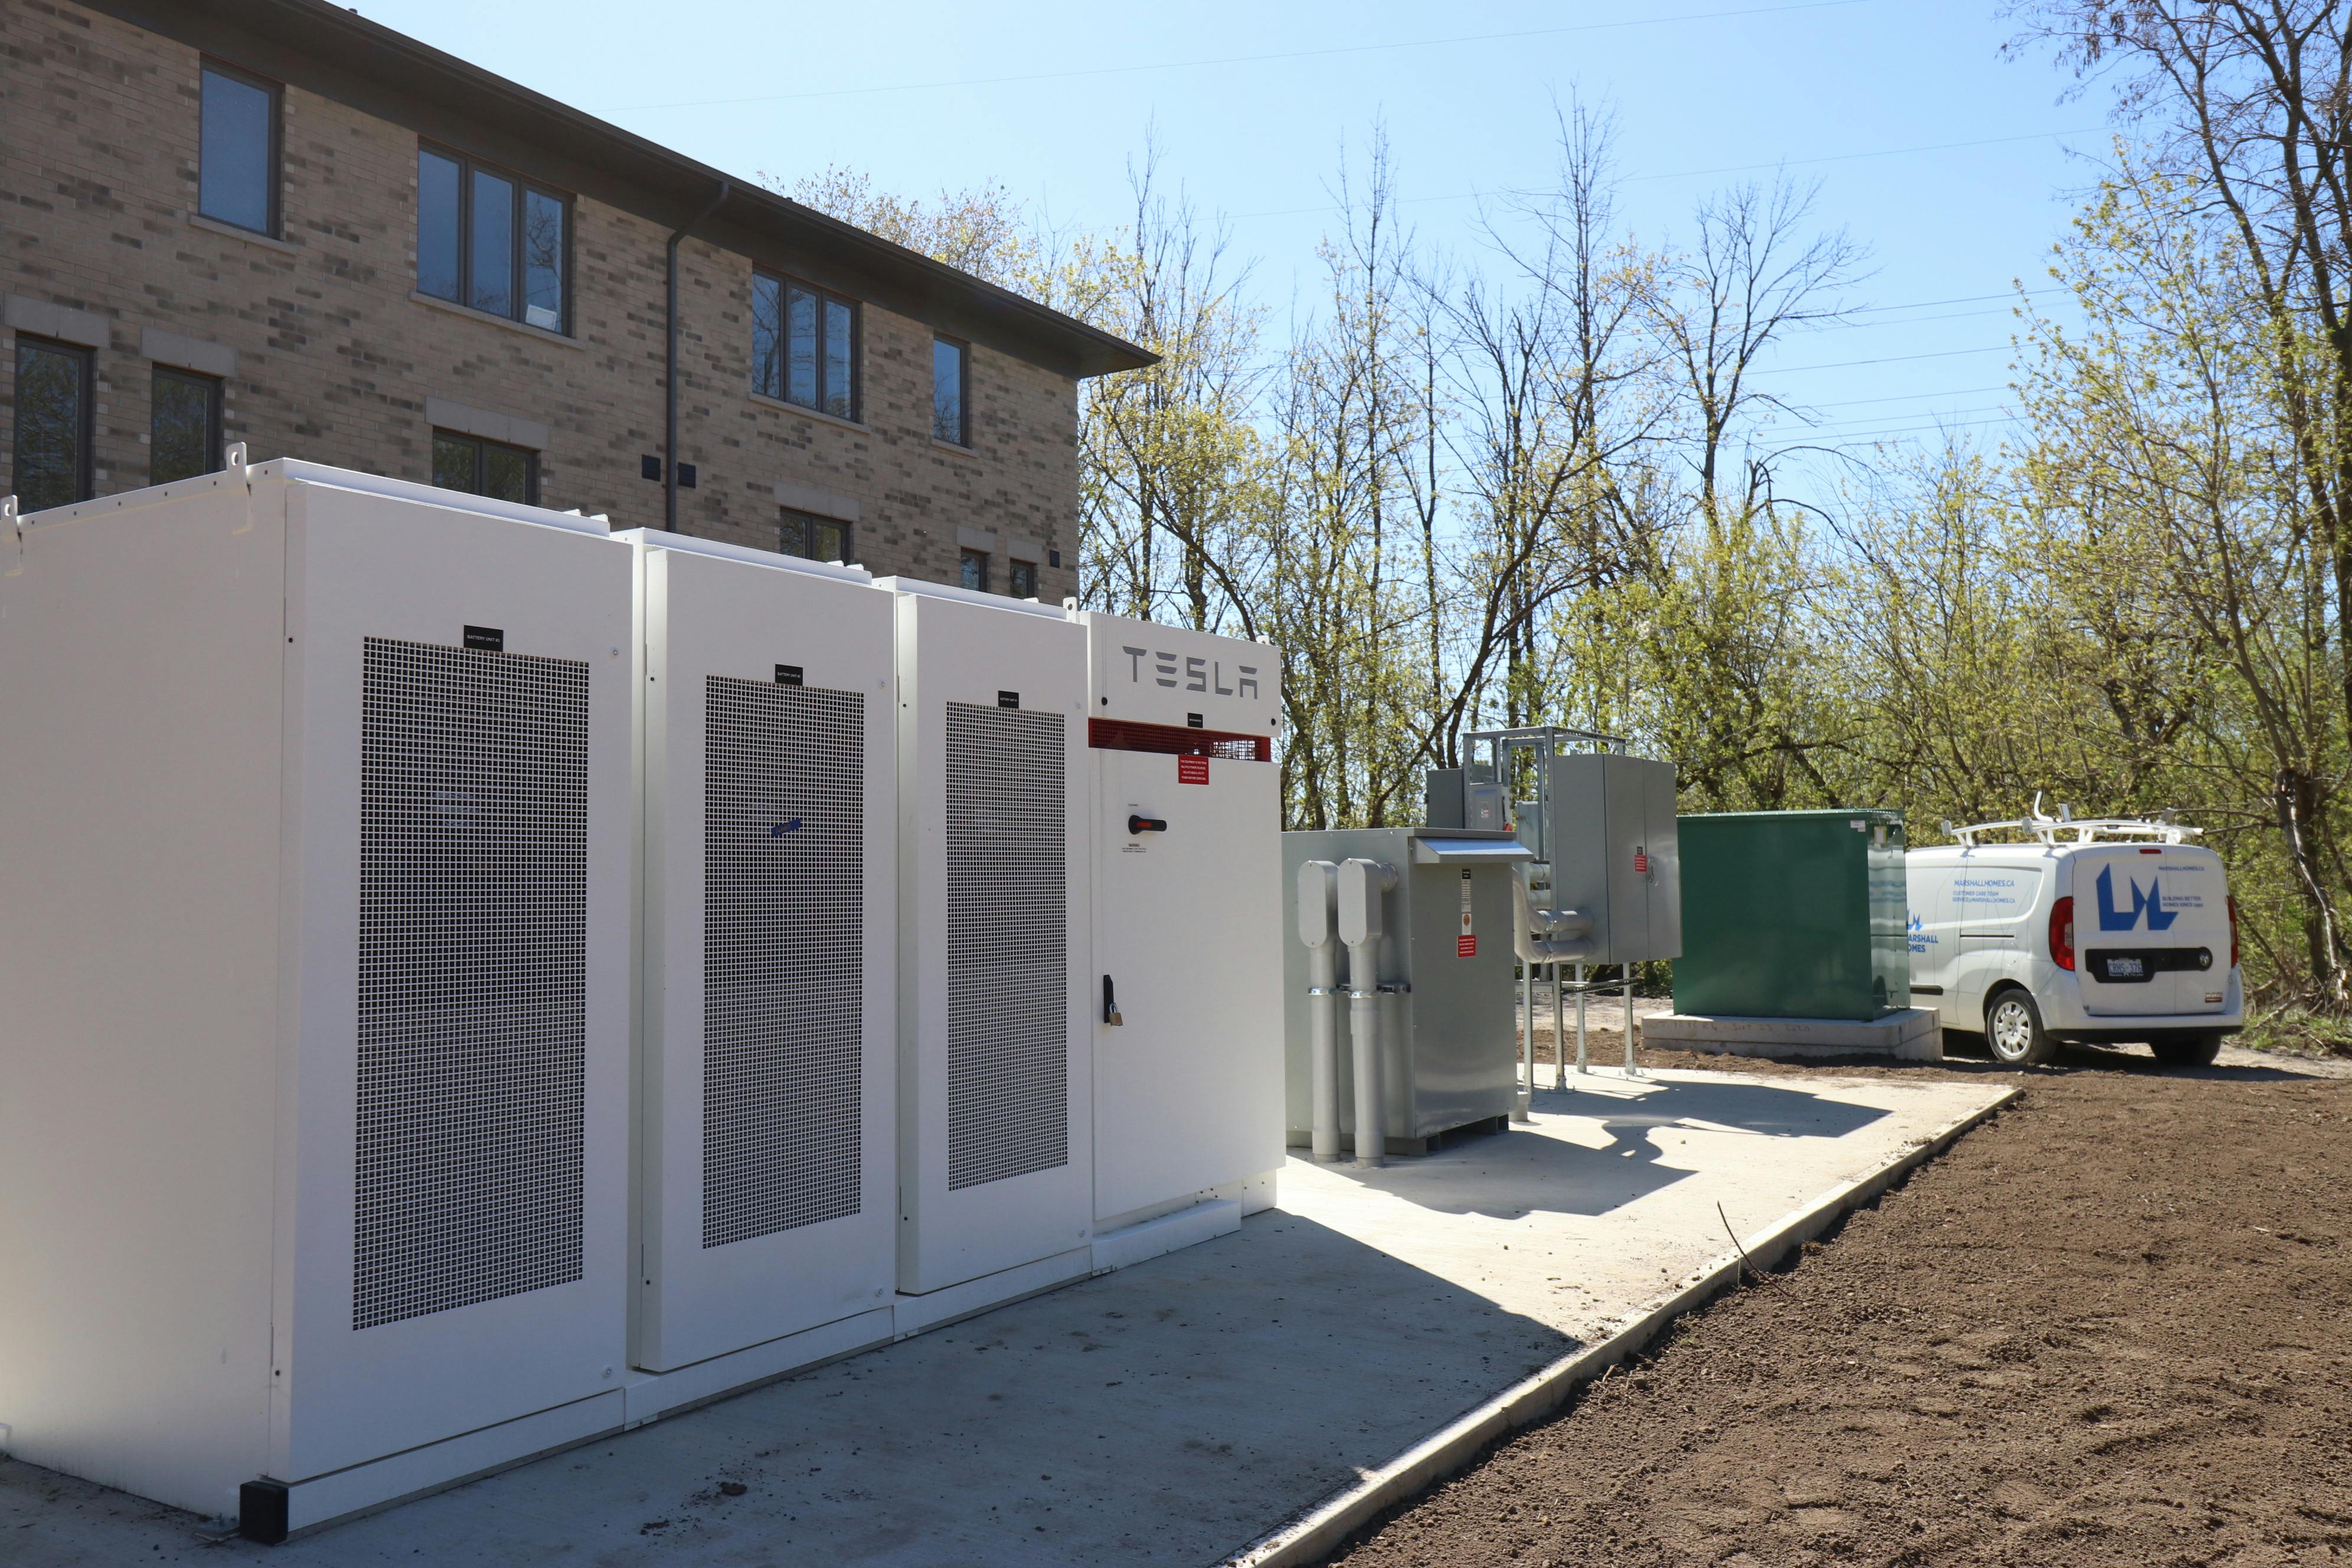 Tesla stand-alone battery to store excess electricity at Marshall Homes development.